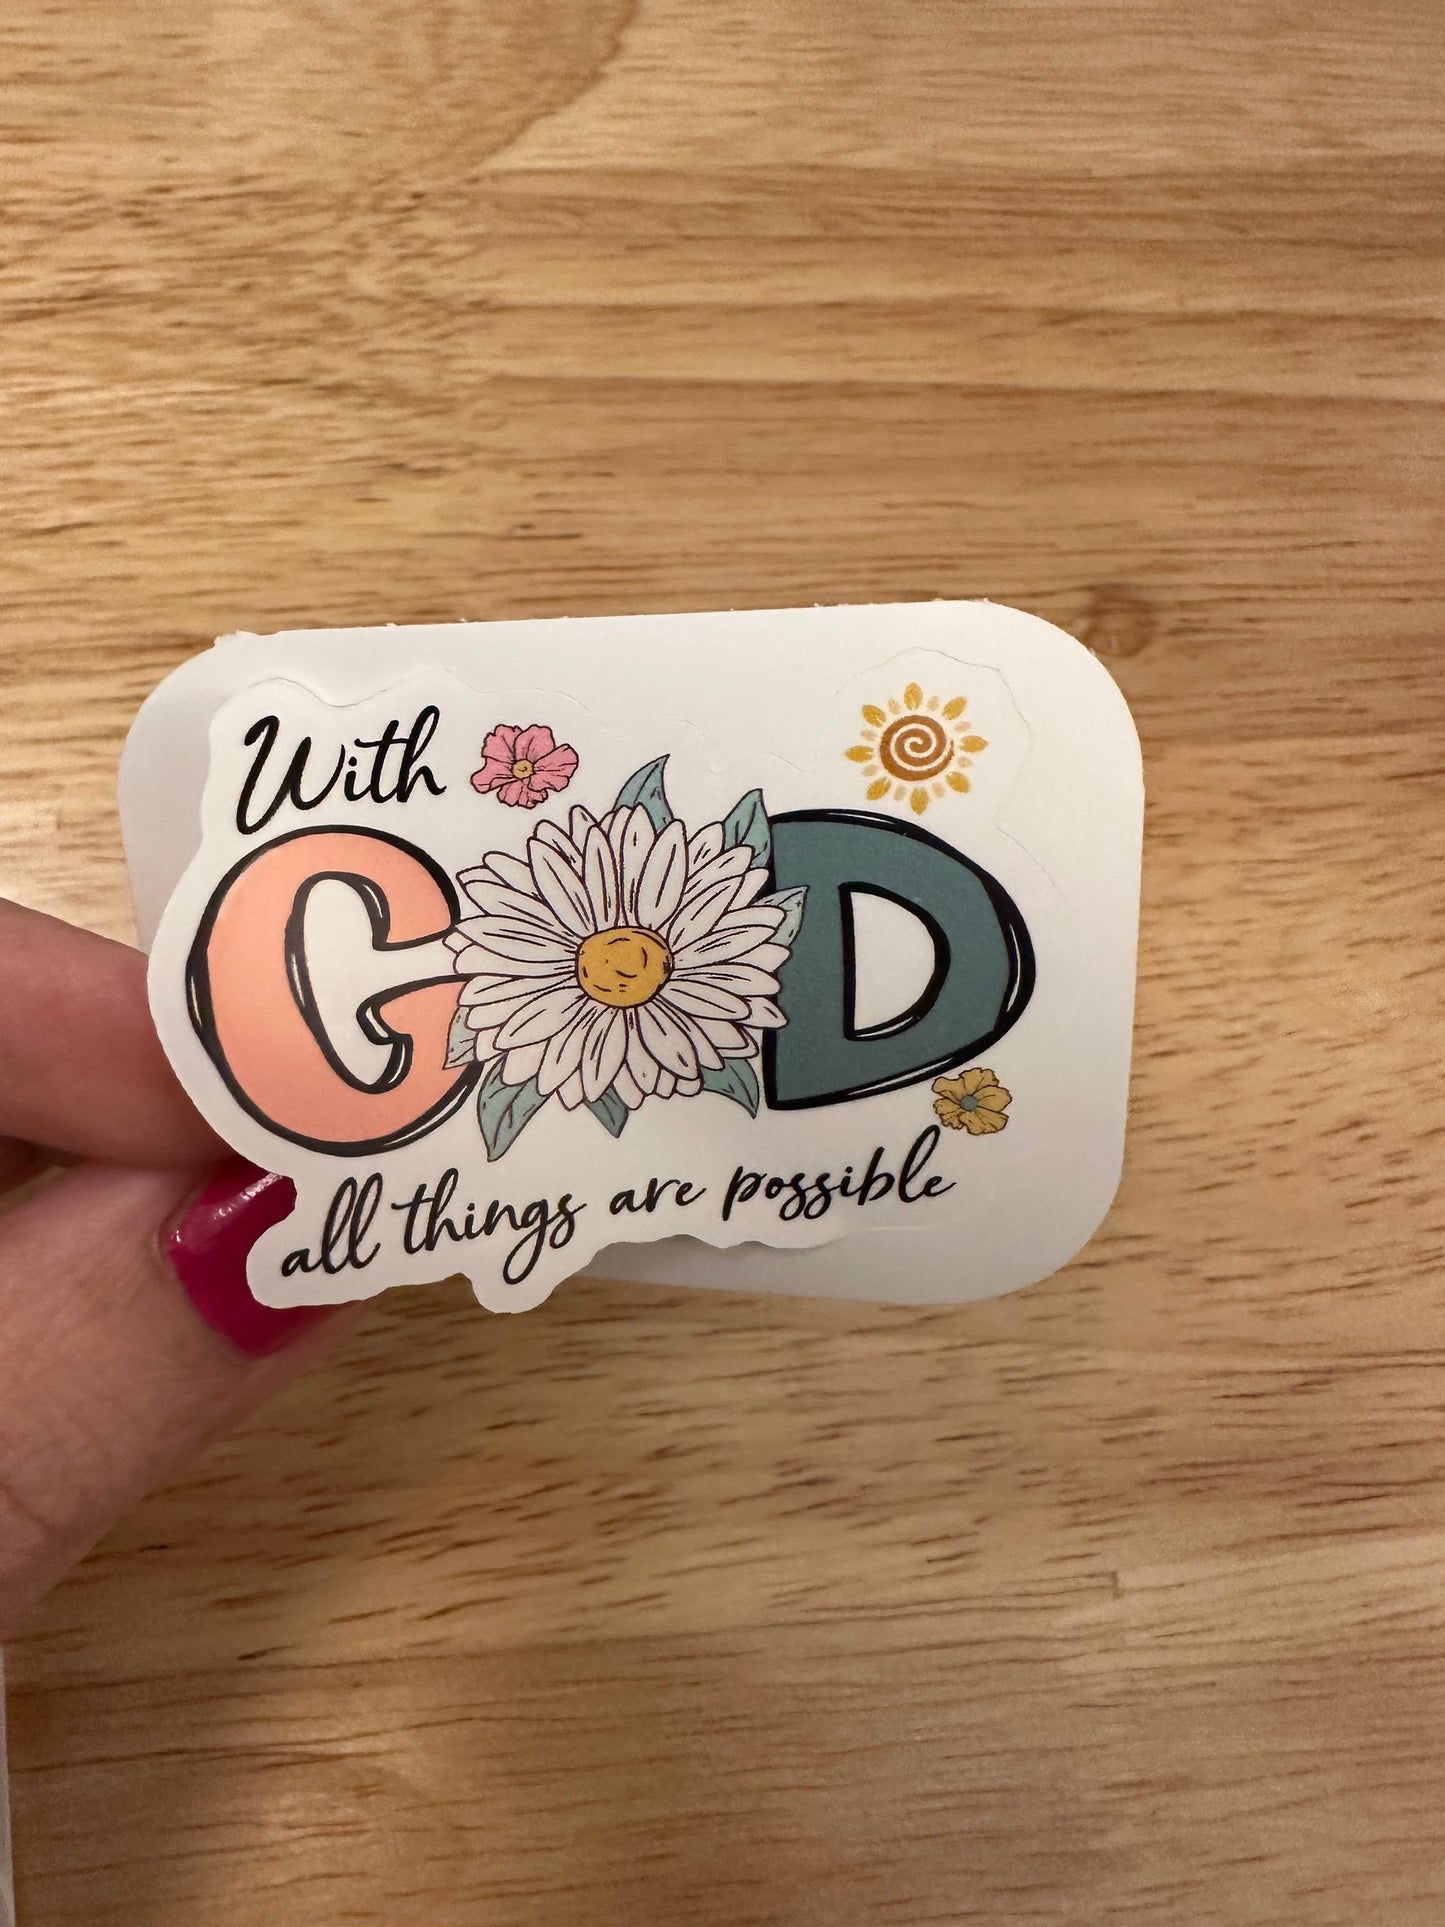 Pack of 4 Christian Stickers, I can do all things through Christ who strengthens me, with God all things are possible, biblical stickers